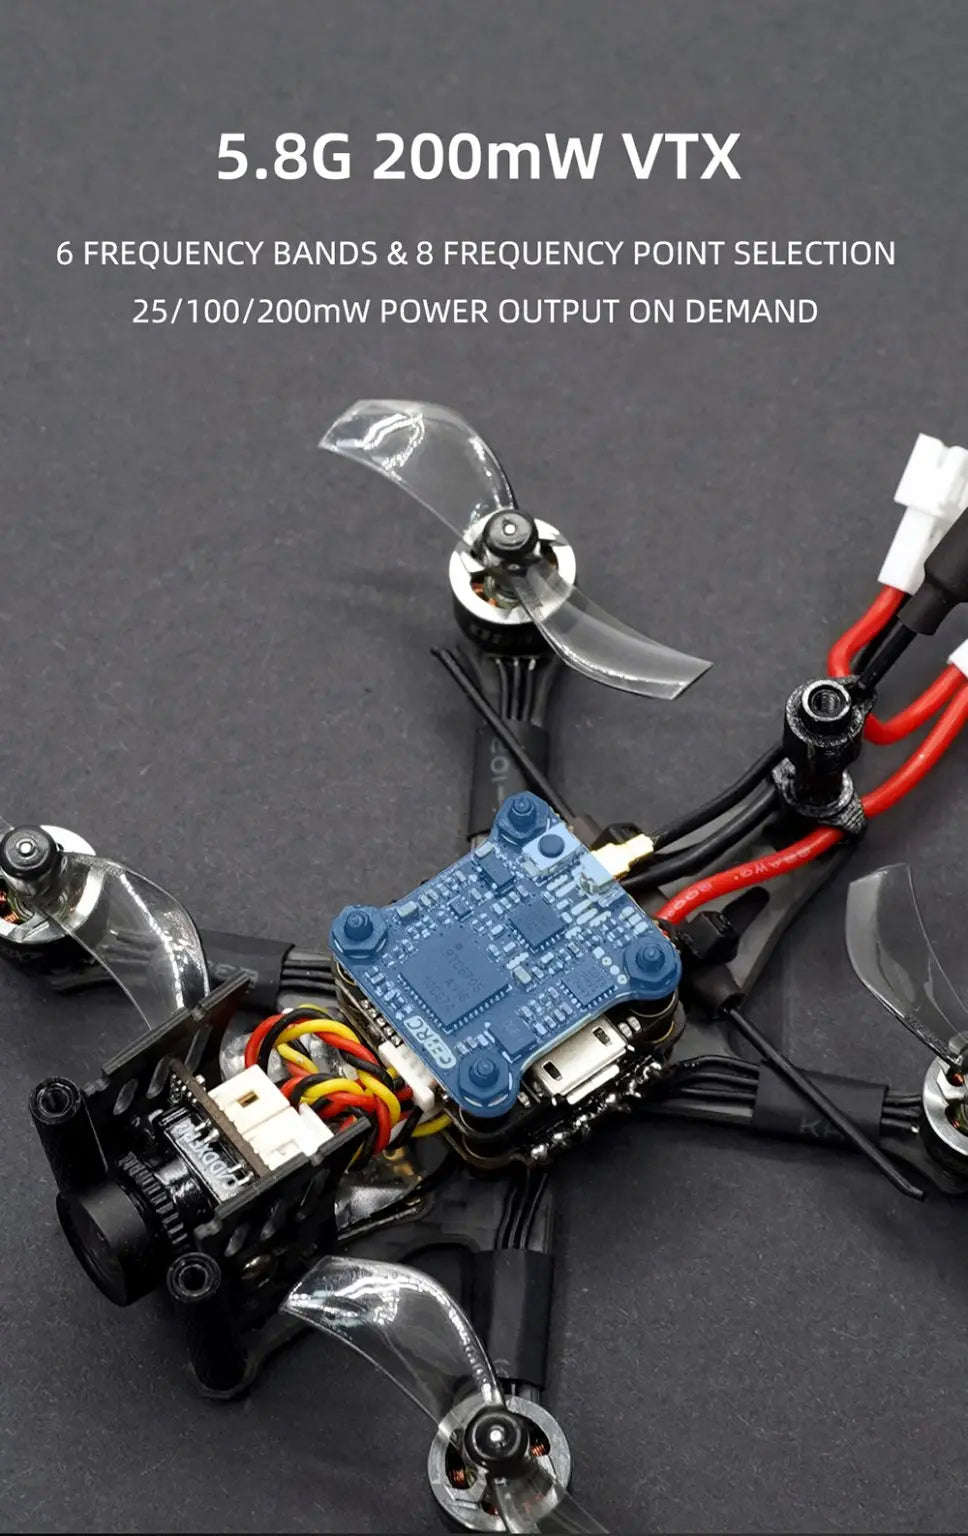 GEPRC SMART 16 Freestyle FPV Drone, 5.86 200mW VTX 6 FREQUENCY BANDS &